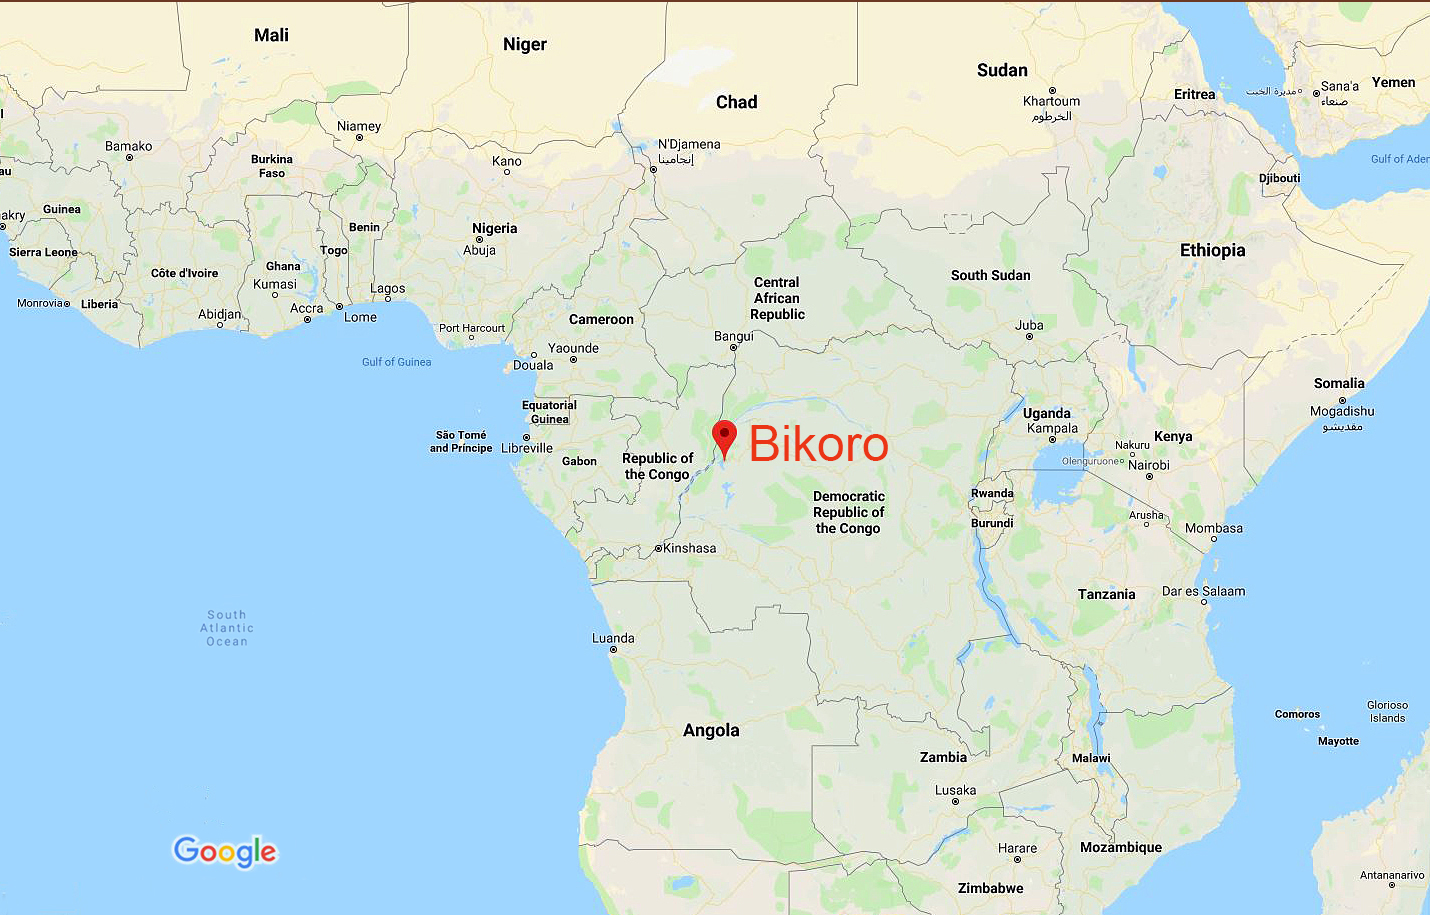 Health officials have declared a new Ebola outbreak in Bikoro in the northwest part of the Democratic Republic of Congo. Photo courtesy of Google Maps.